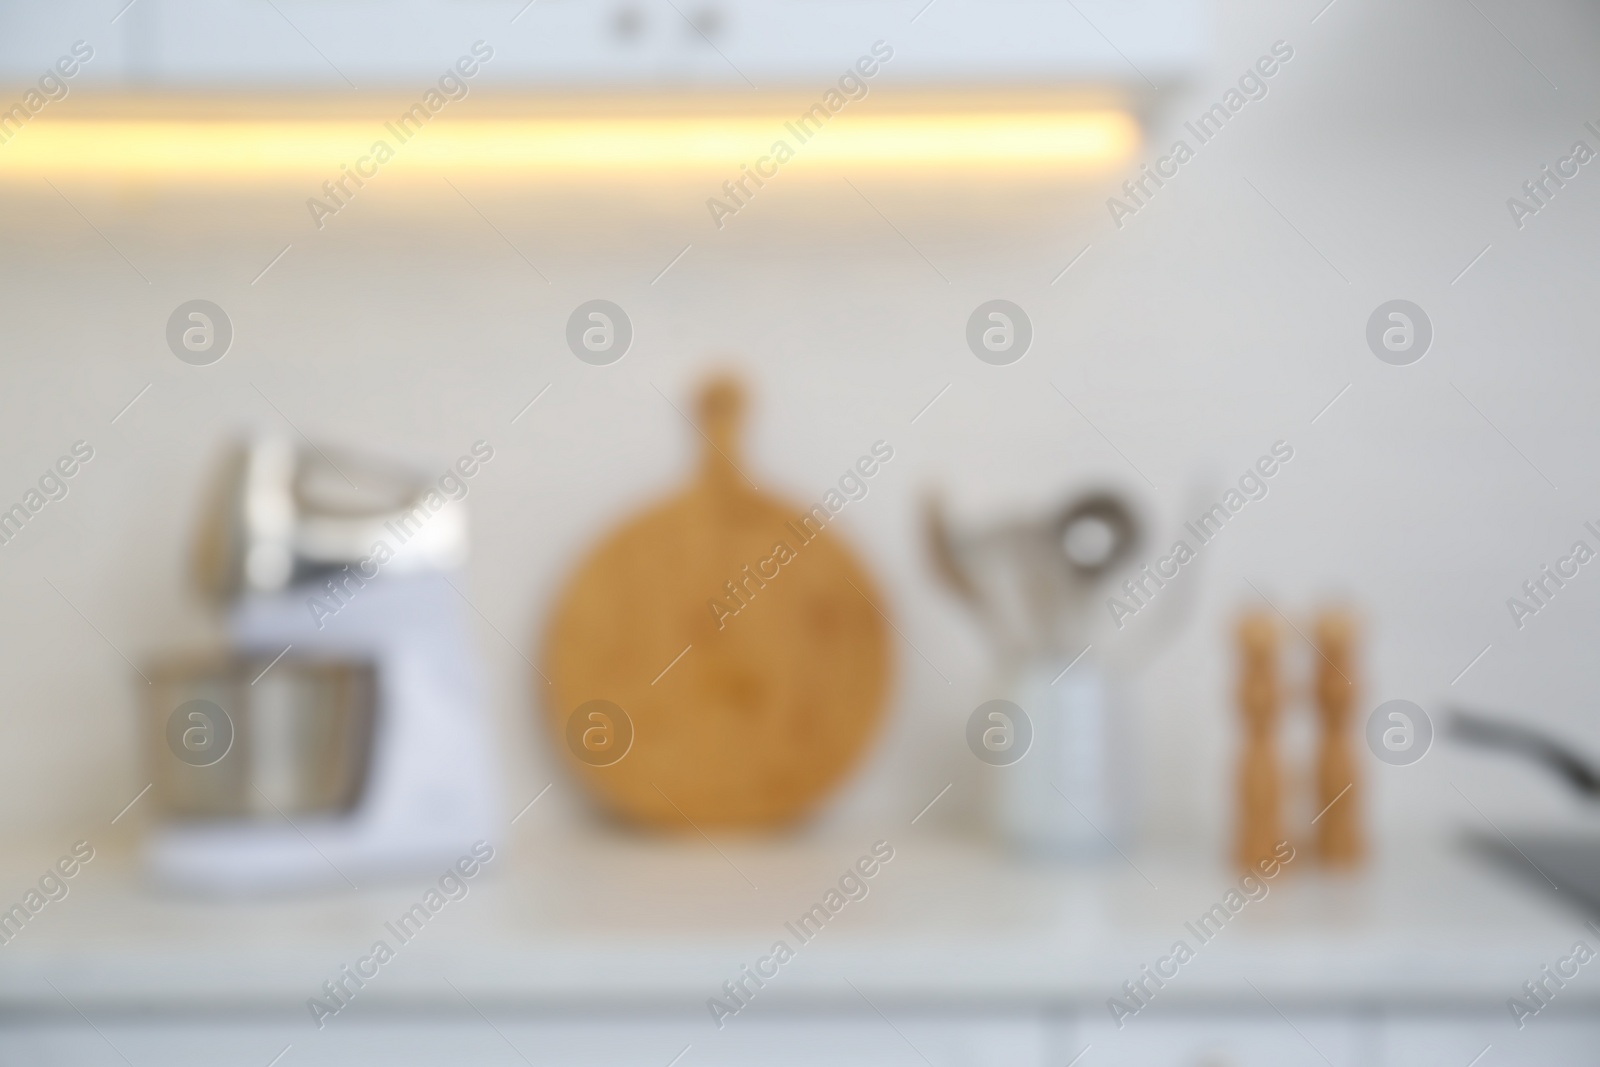 Photo of Blurred view of modern kitchen with utensils